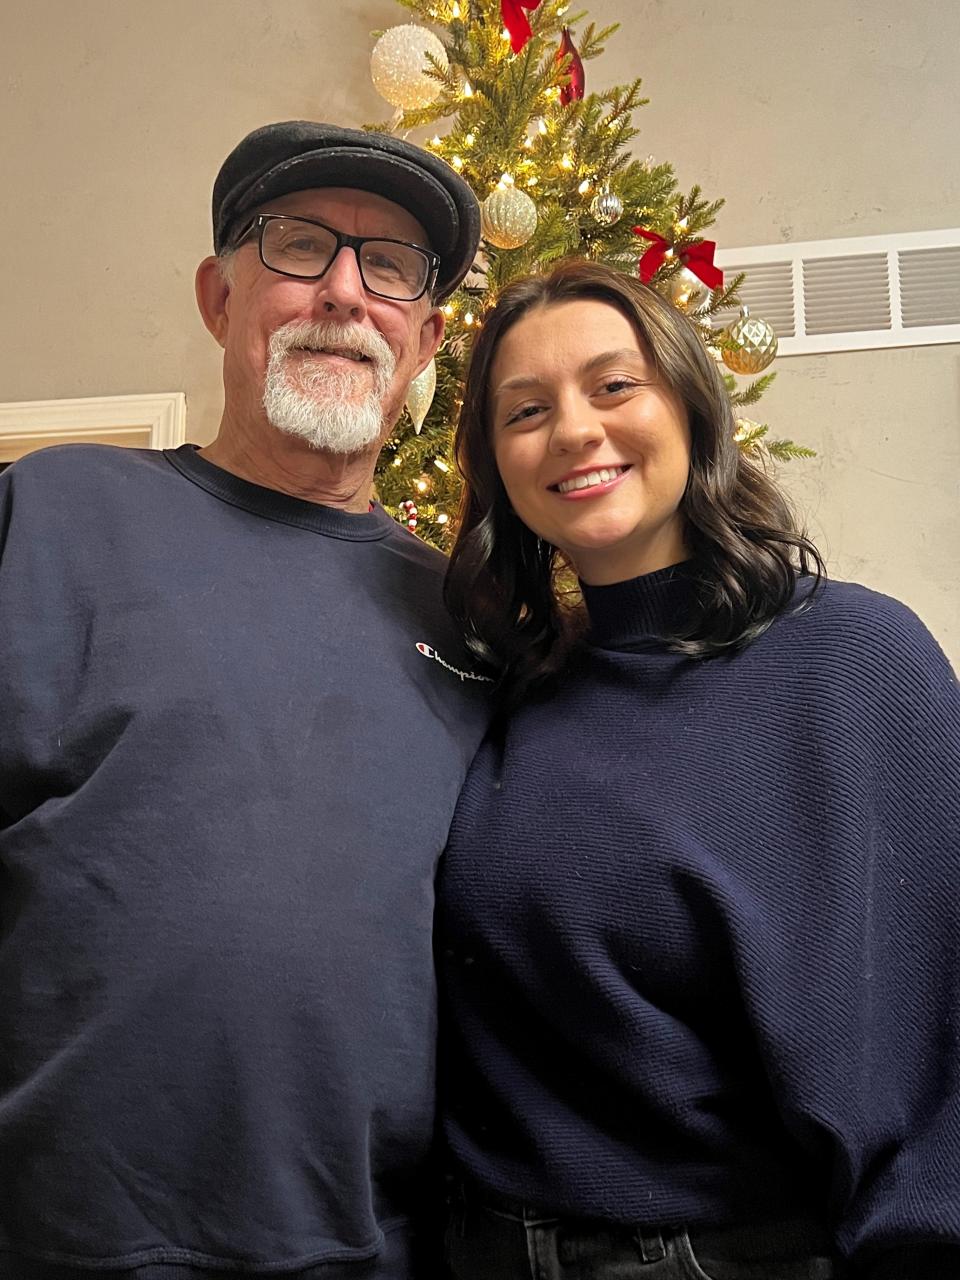 David Smith, 68, will celebrate his first Christmas with the kidney Anna Johnson, 21, donated to him on April 25. Smith is a McConnelsville resident and Johnson lives in Lithopolis. Both are members of X Church in Canal Winchester.